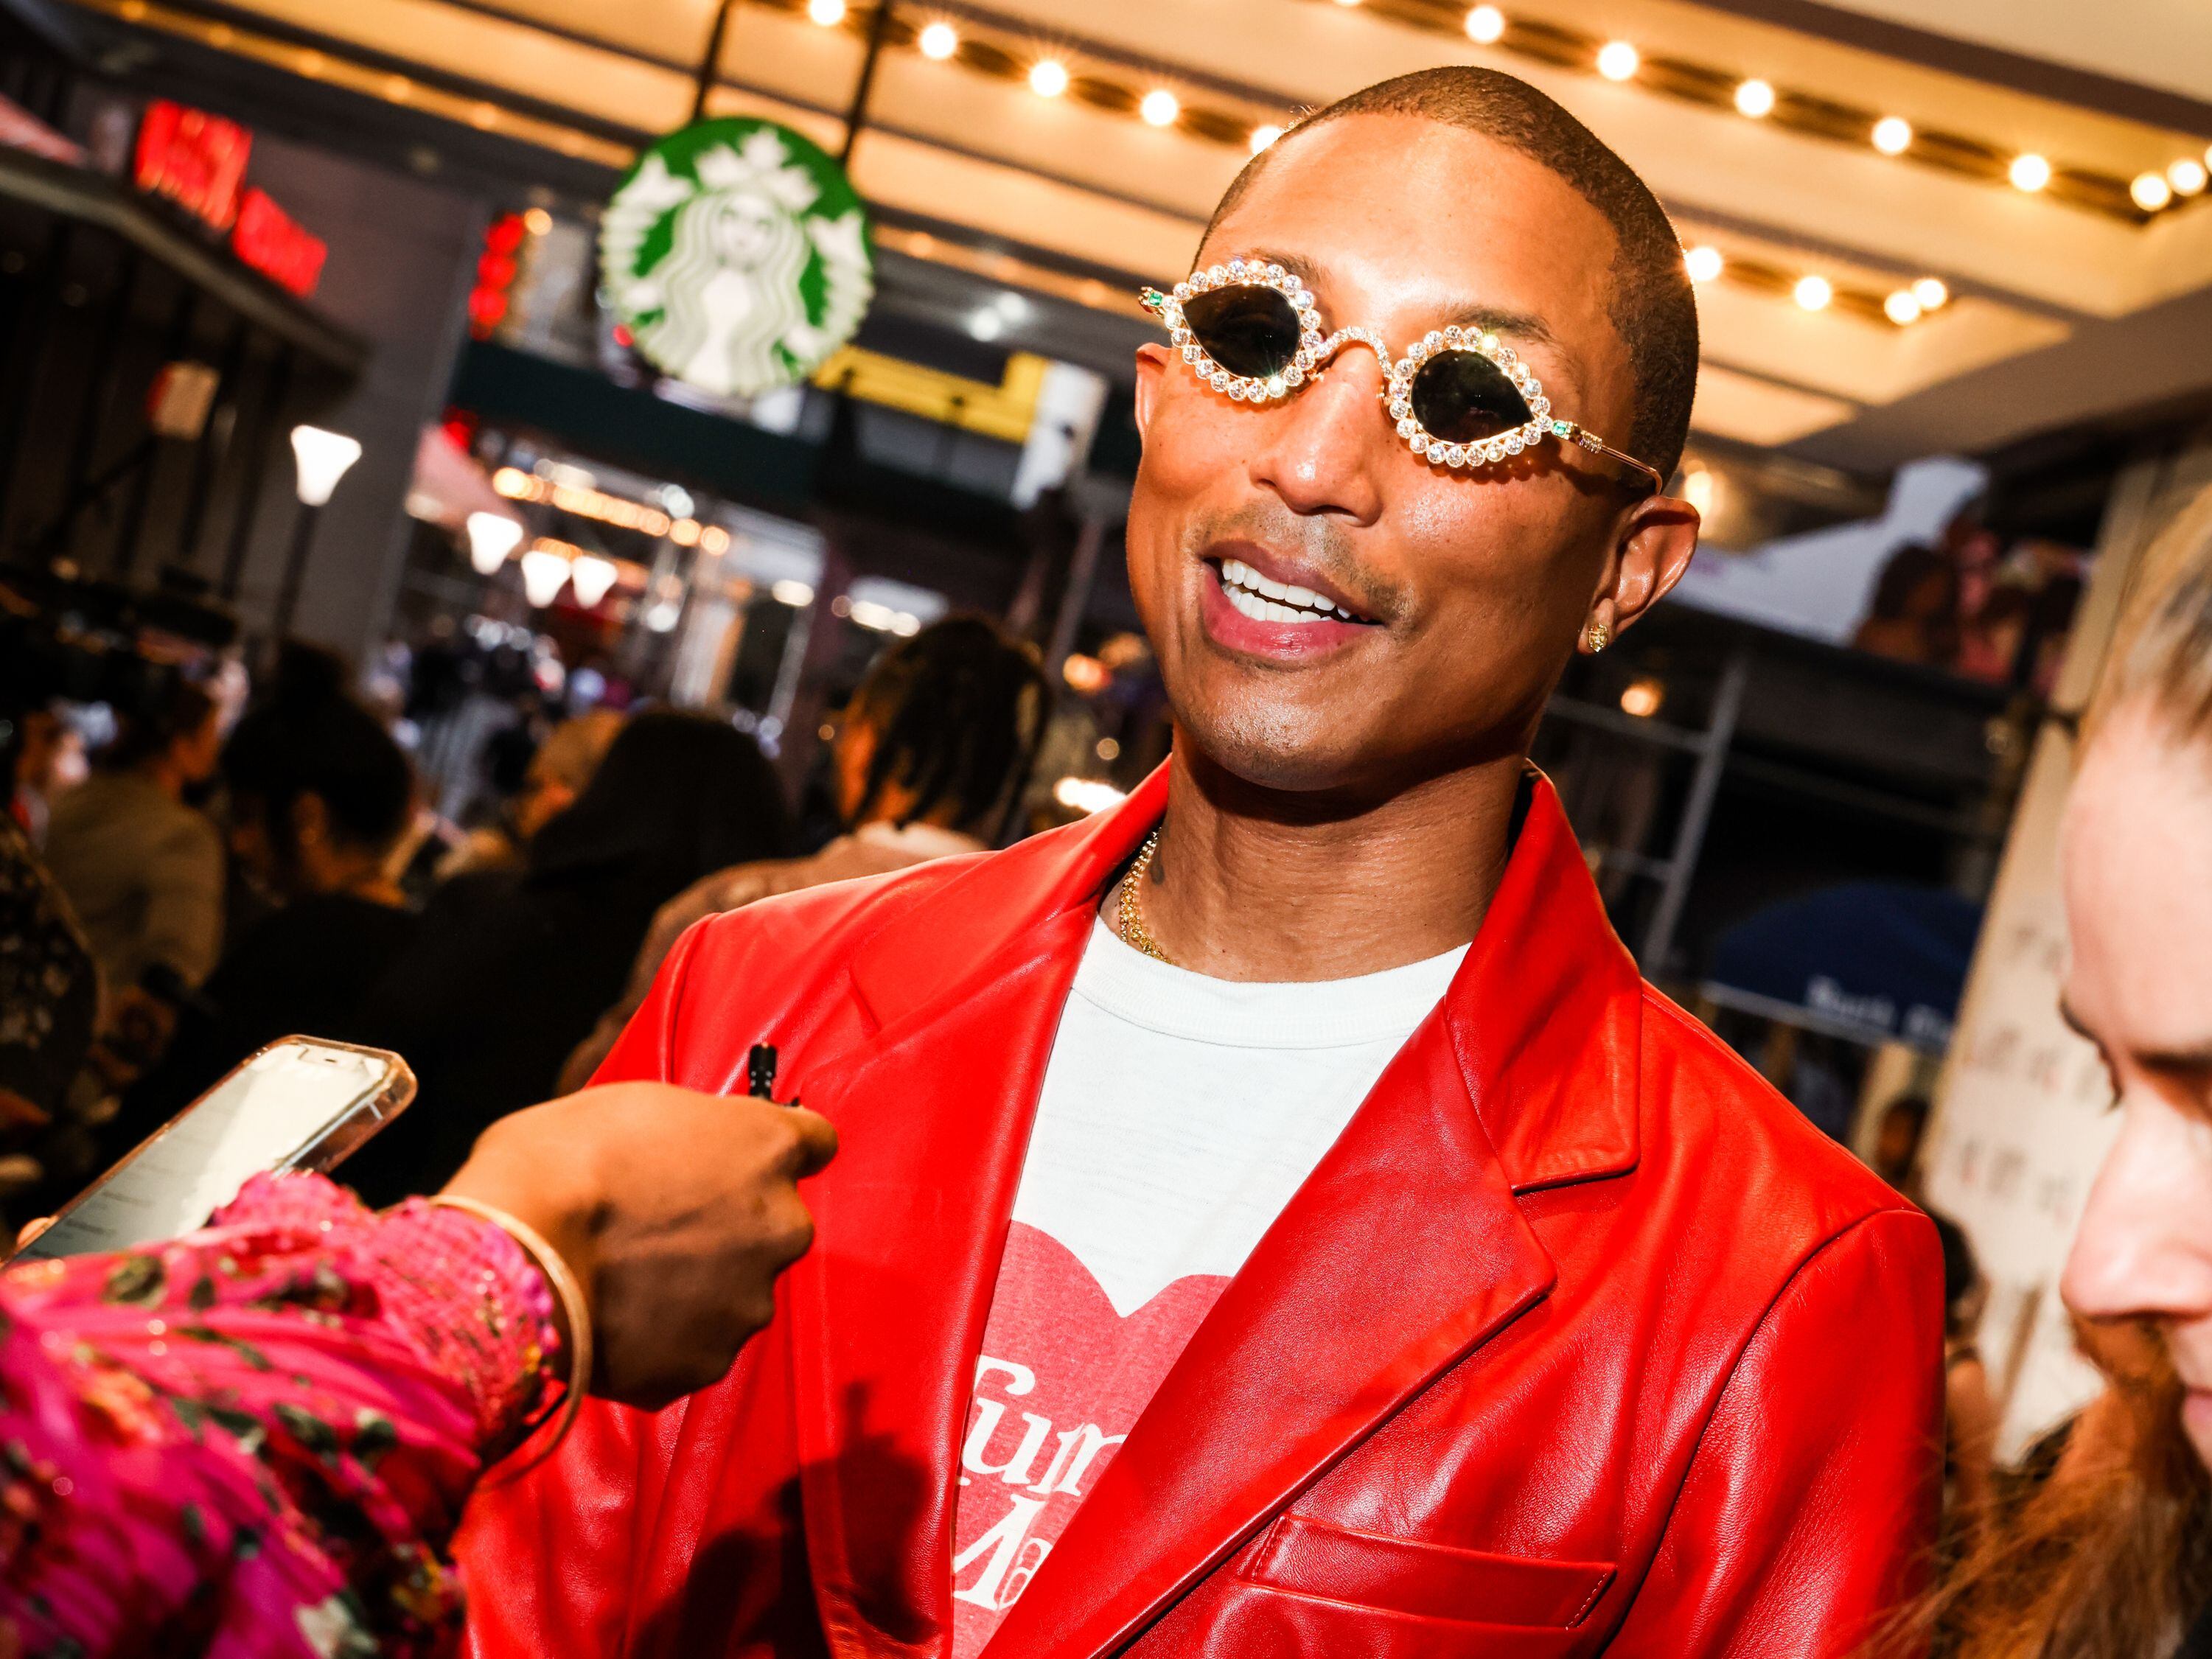 IN CASE YOU MISSED IT: Pharrell Williams named creative director